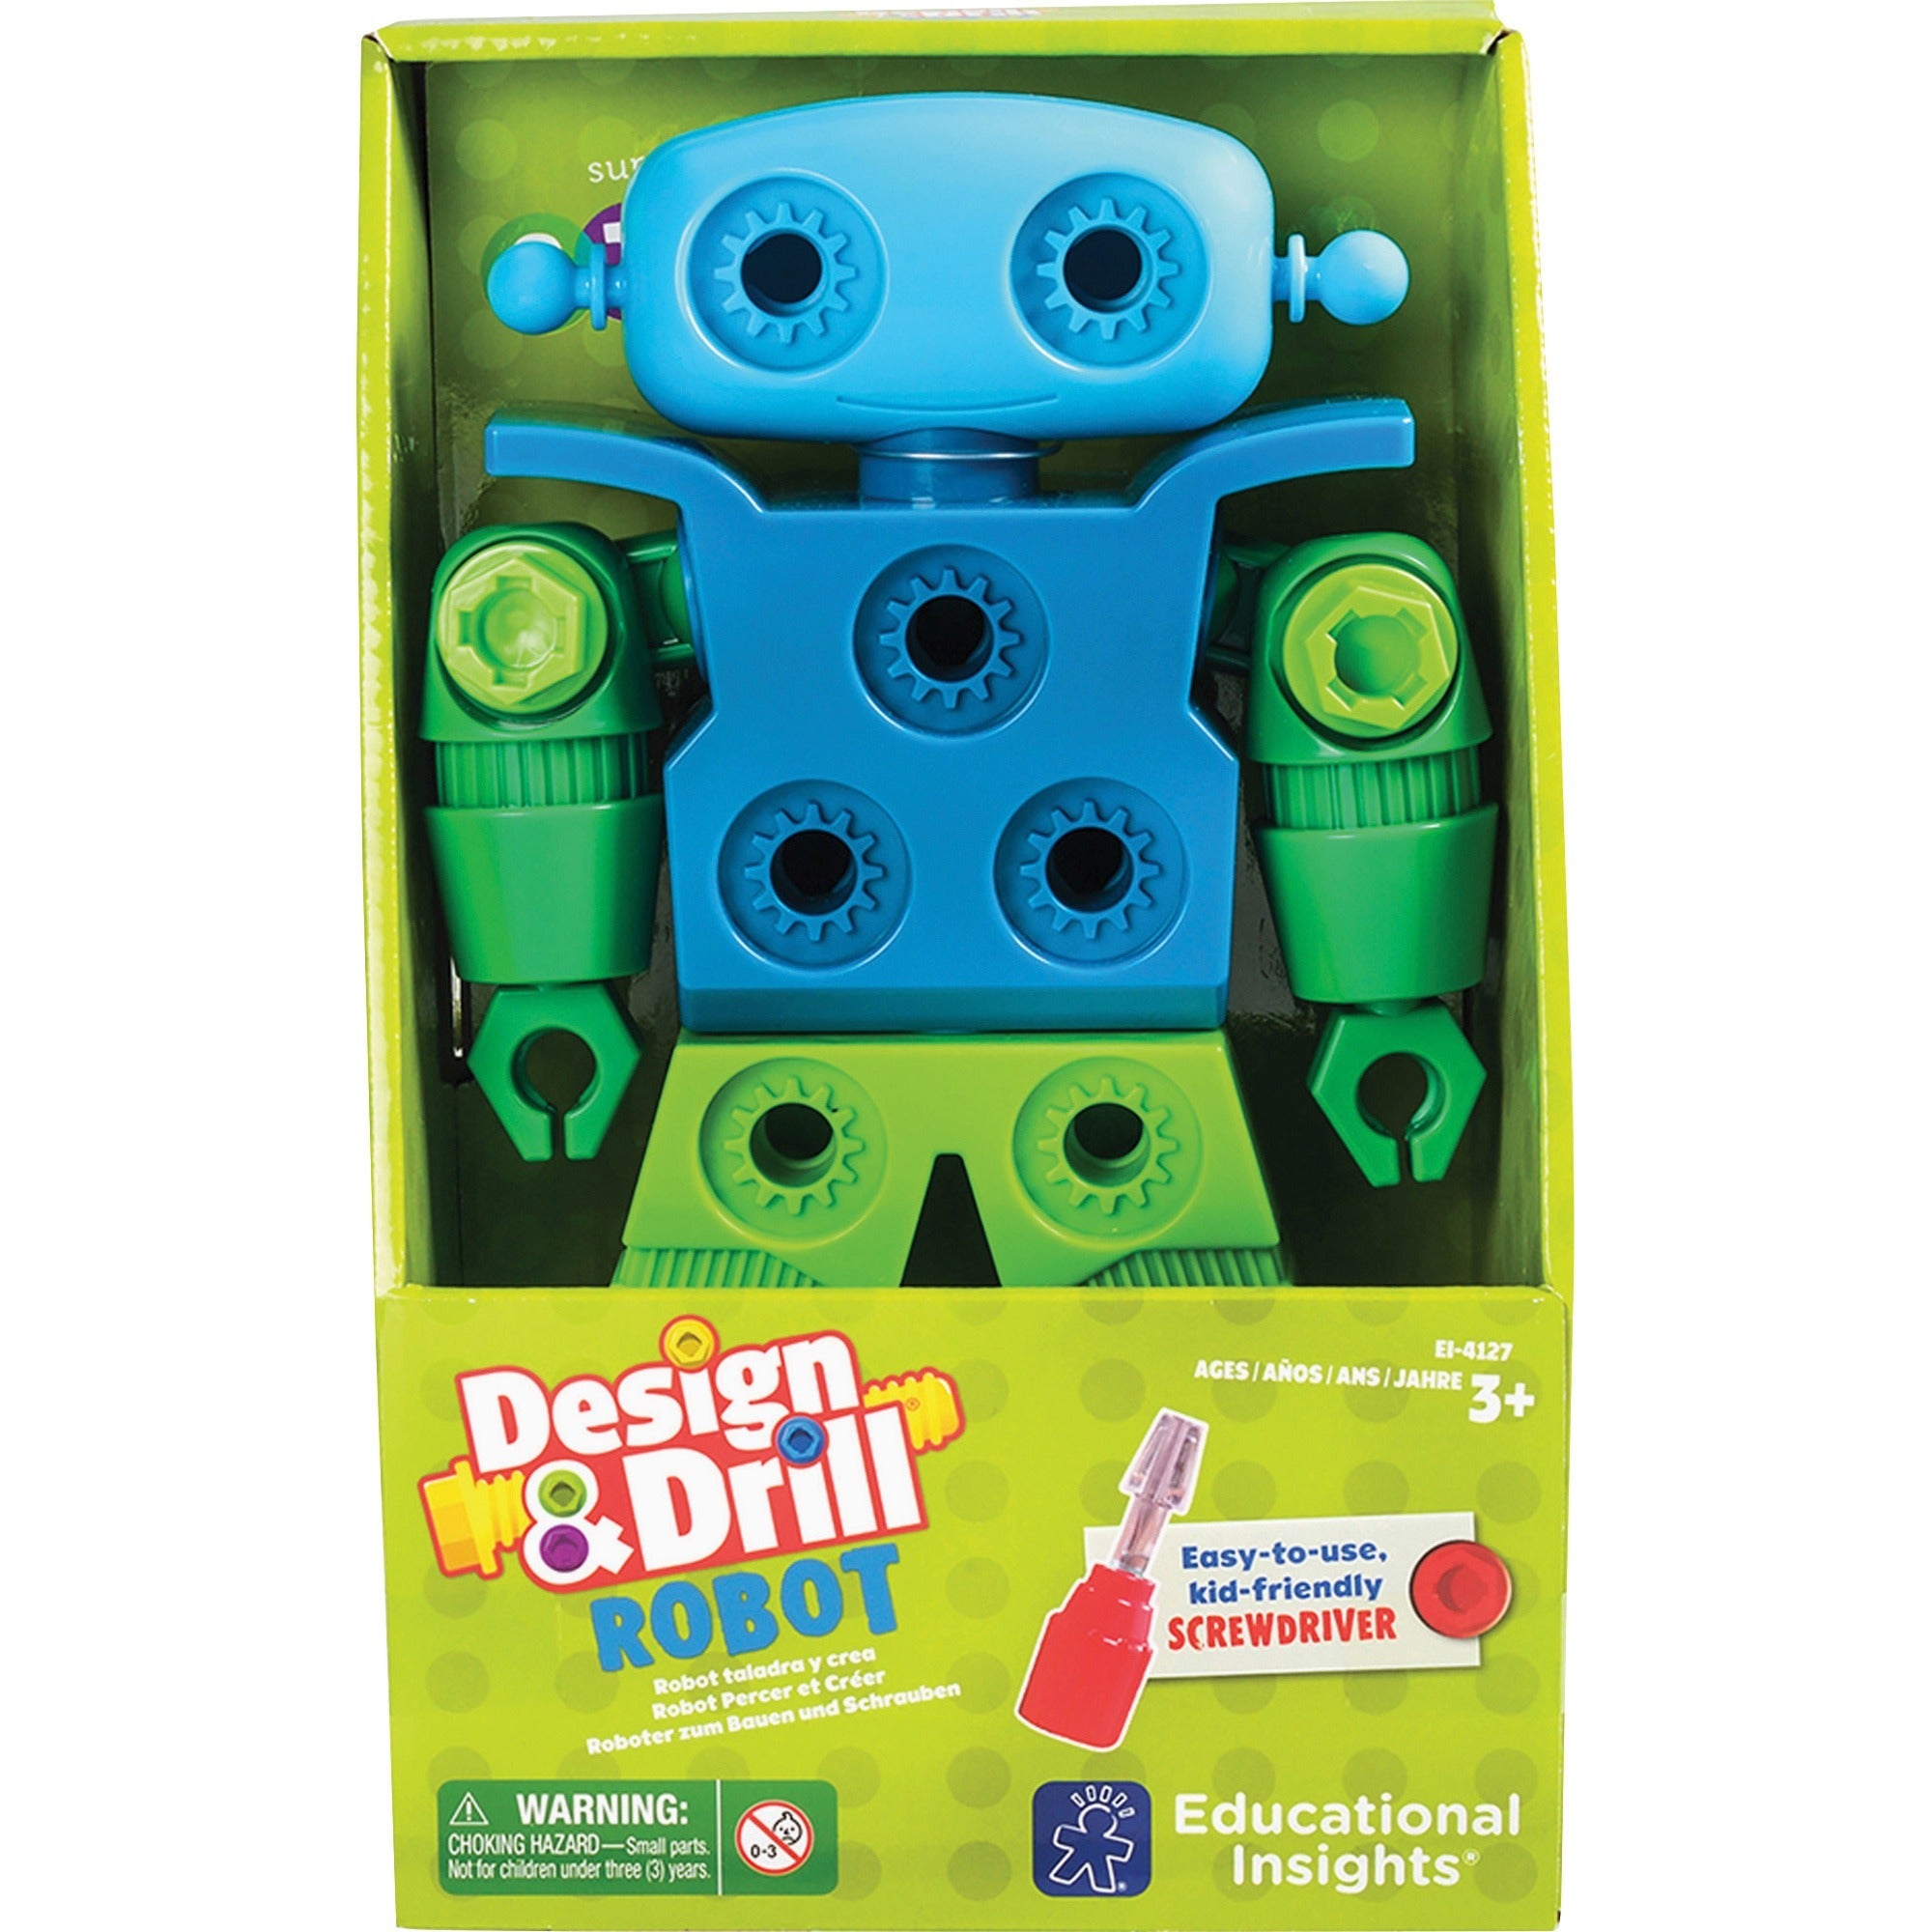 educational-insights-design-&-drill-robot-play-set-theme-subject-learning-skill-learning-problem-solving-creativity-eye-hand-coordination-multi_eii4127 - 1